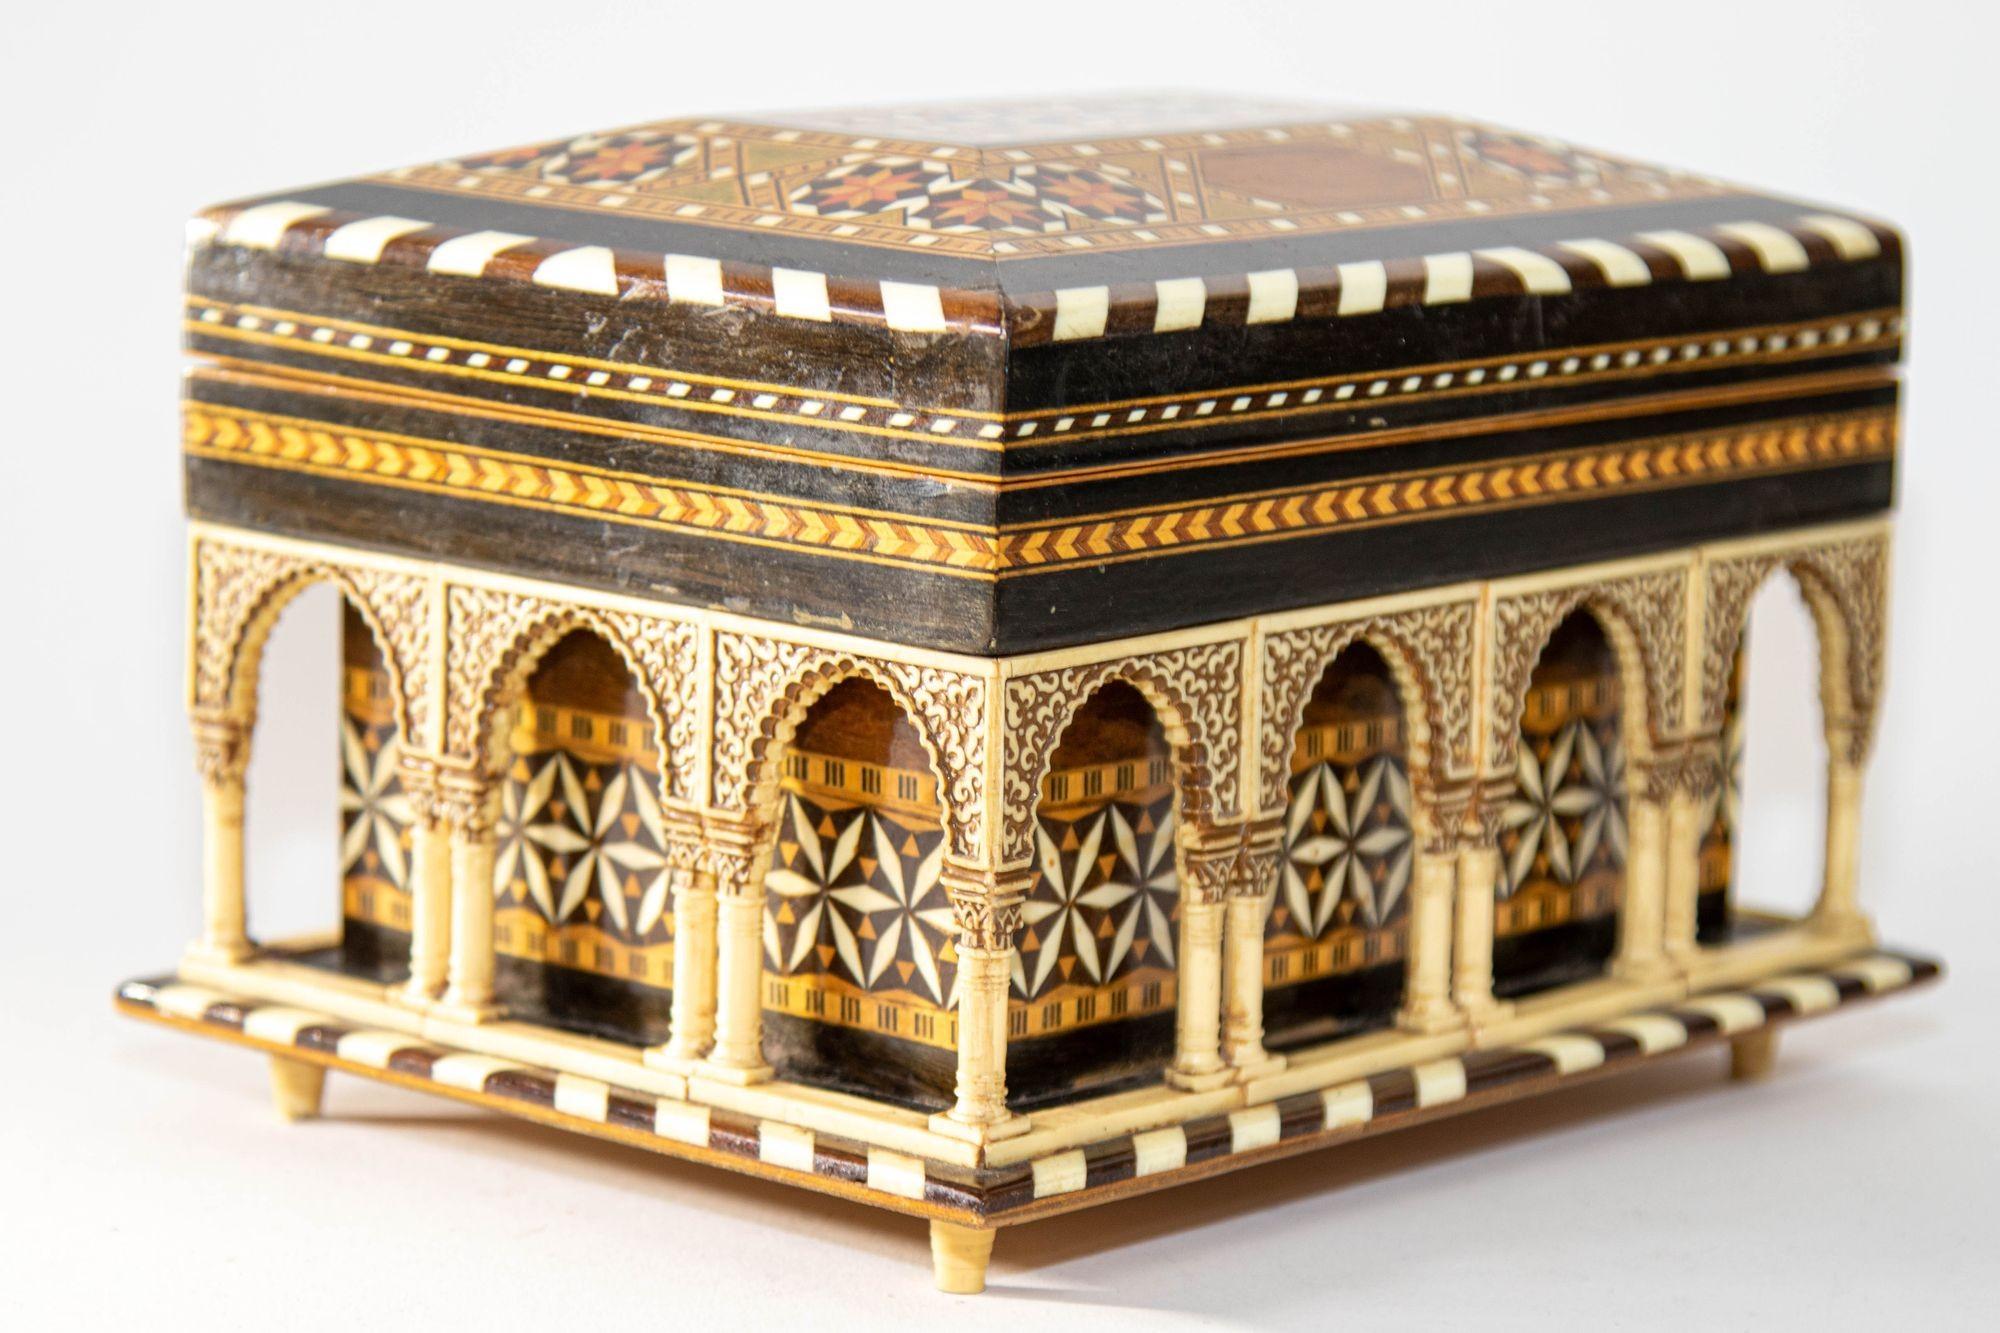 1950s Alhambra Palace Granada Spain Handmade Footed Moorish Vanity Box.
Vintage Beautiful wood marquetry jewelry trinket Box, Architectural Model of the Granada's Alhambra Palace Moorish Islamic Art.
DIMENSIONS: Height: 5.25 in (14 cm)Width: 6.25 in